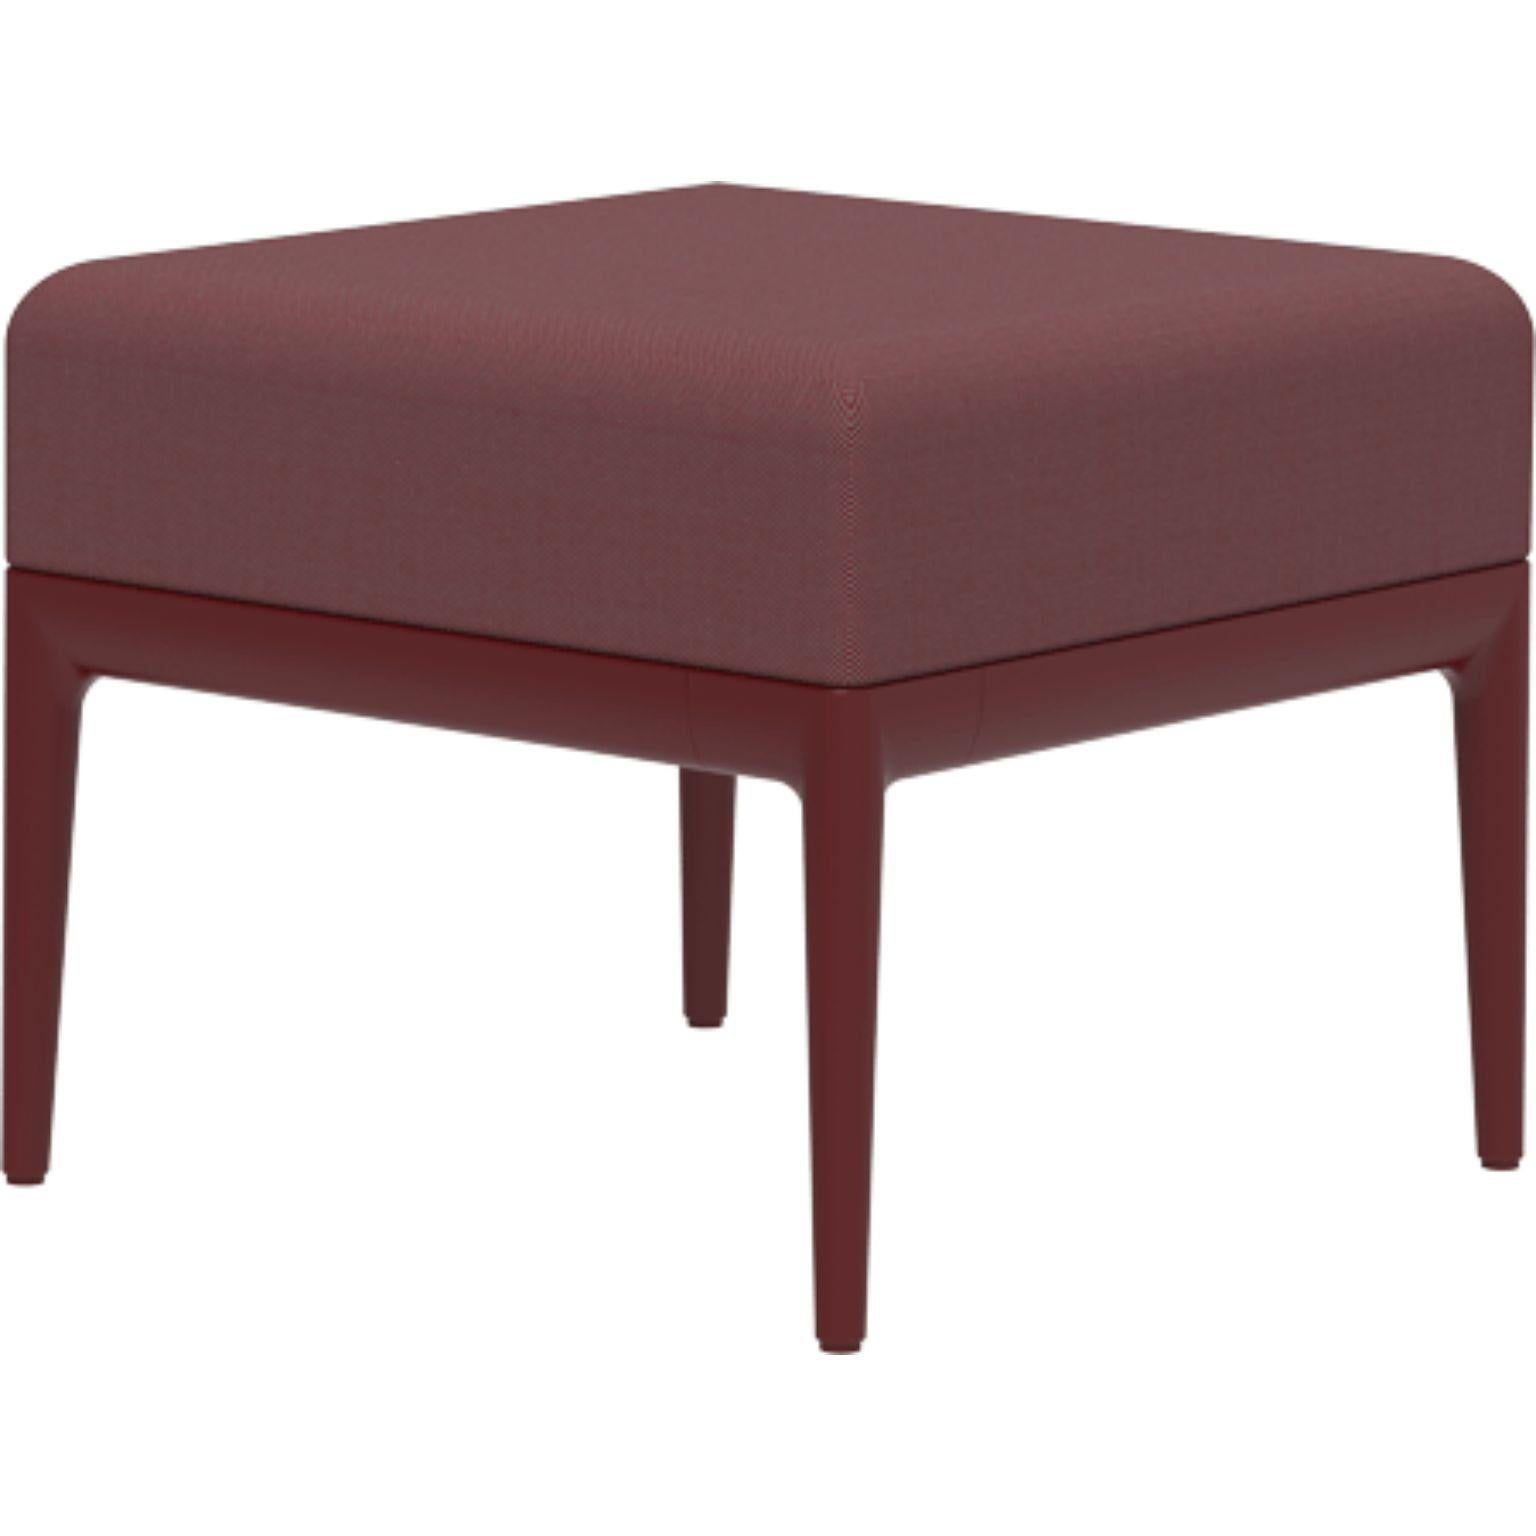 Ribbons Burgundy Puff by MOWEE
Dimensions: D50 x W50 x H42 cm.
Material: Aluminum and upholstery.
Weight: 9.3 kg
Also available in different colors and finishes. 

An unmistakable collection for its beauty and robustness. A tribute to the